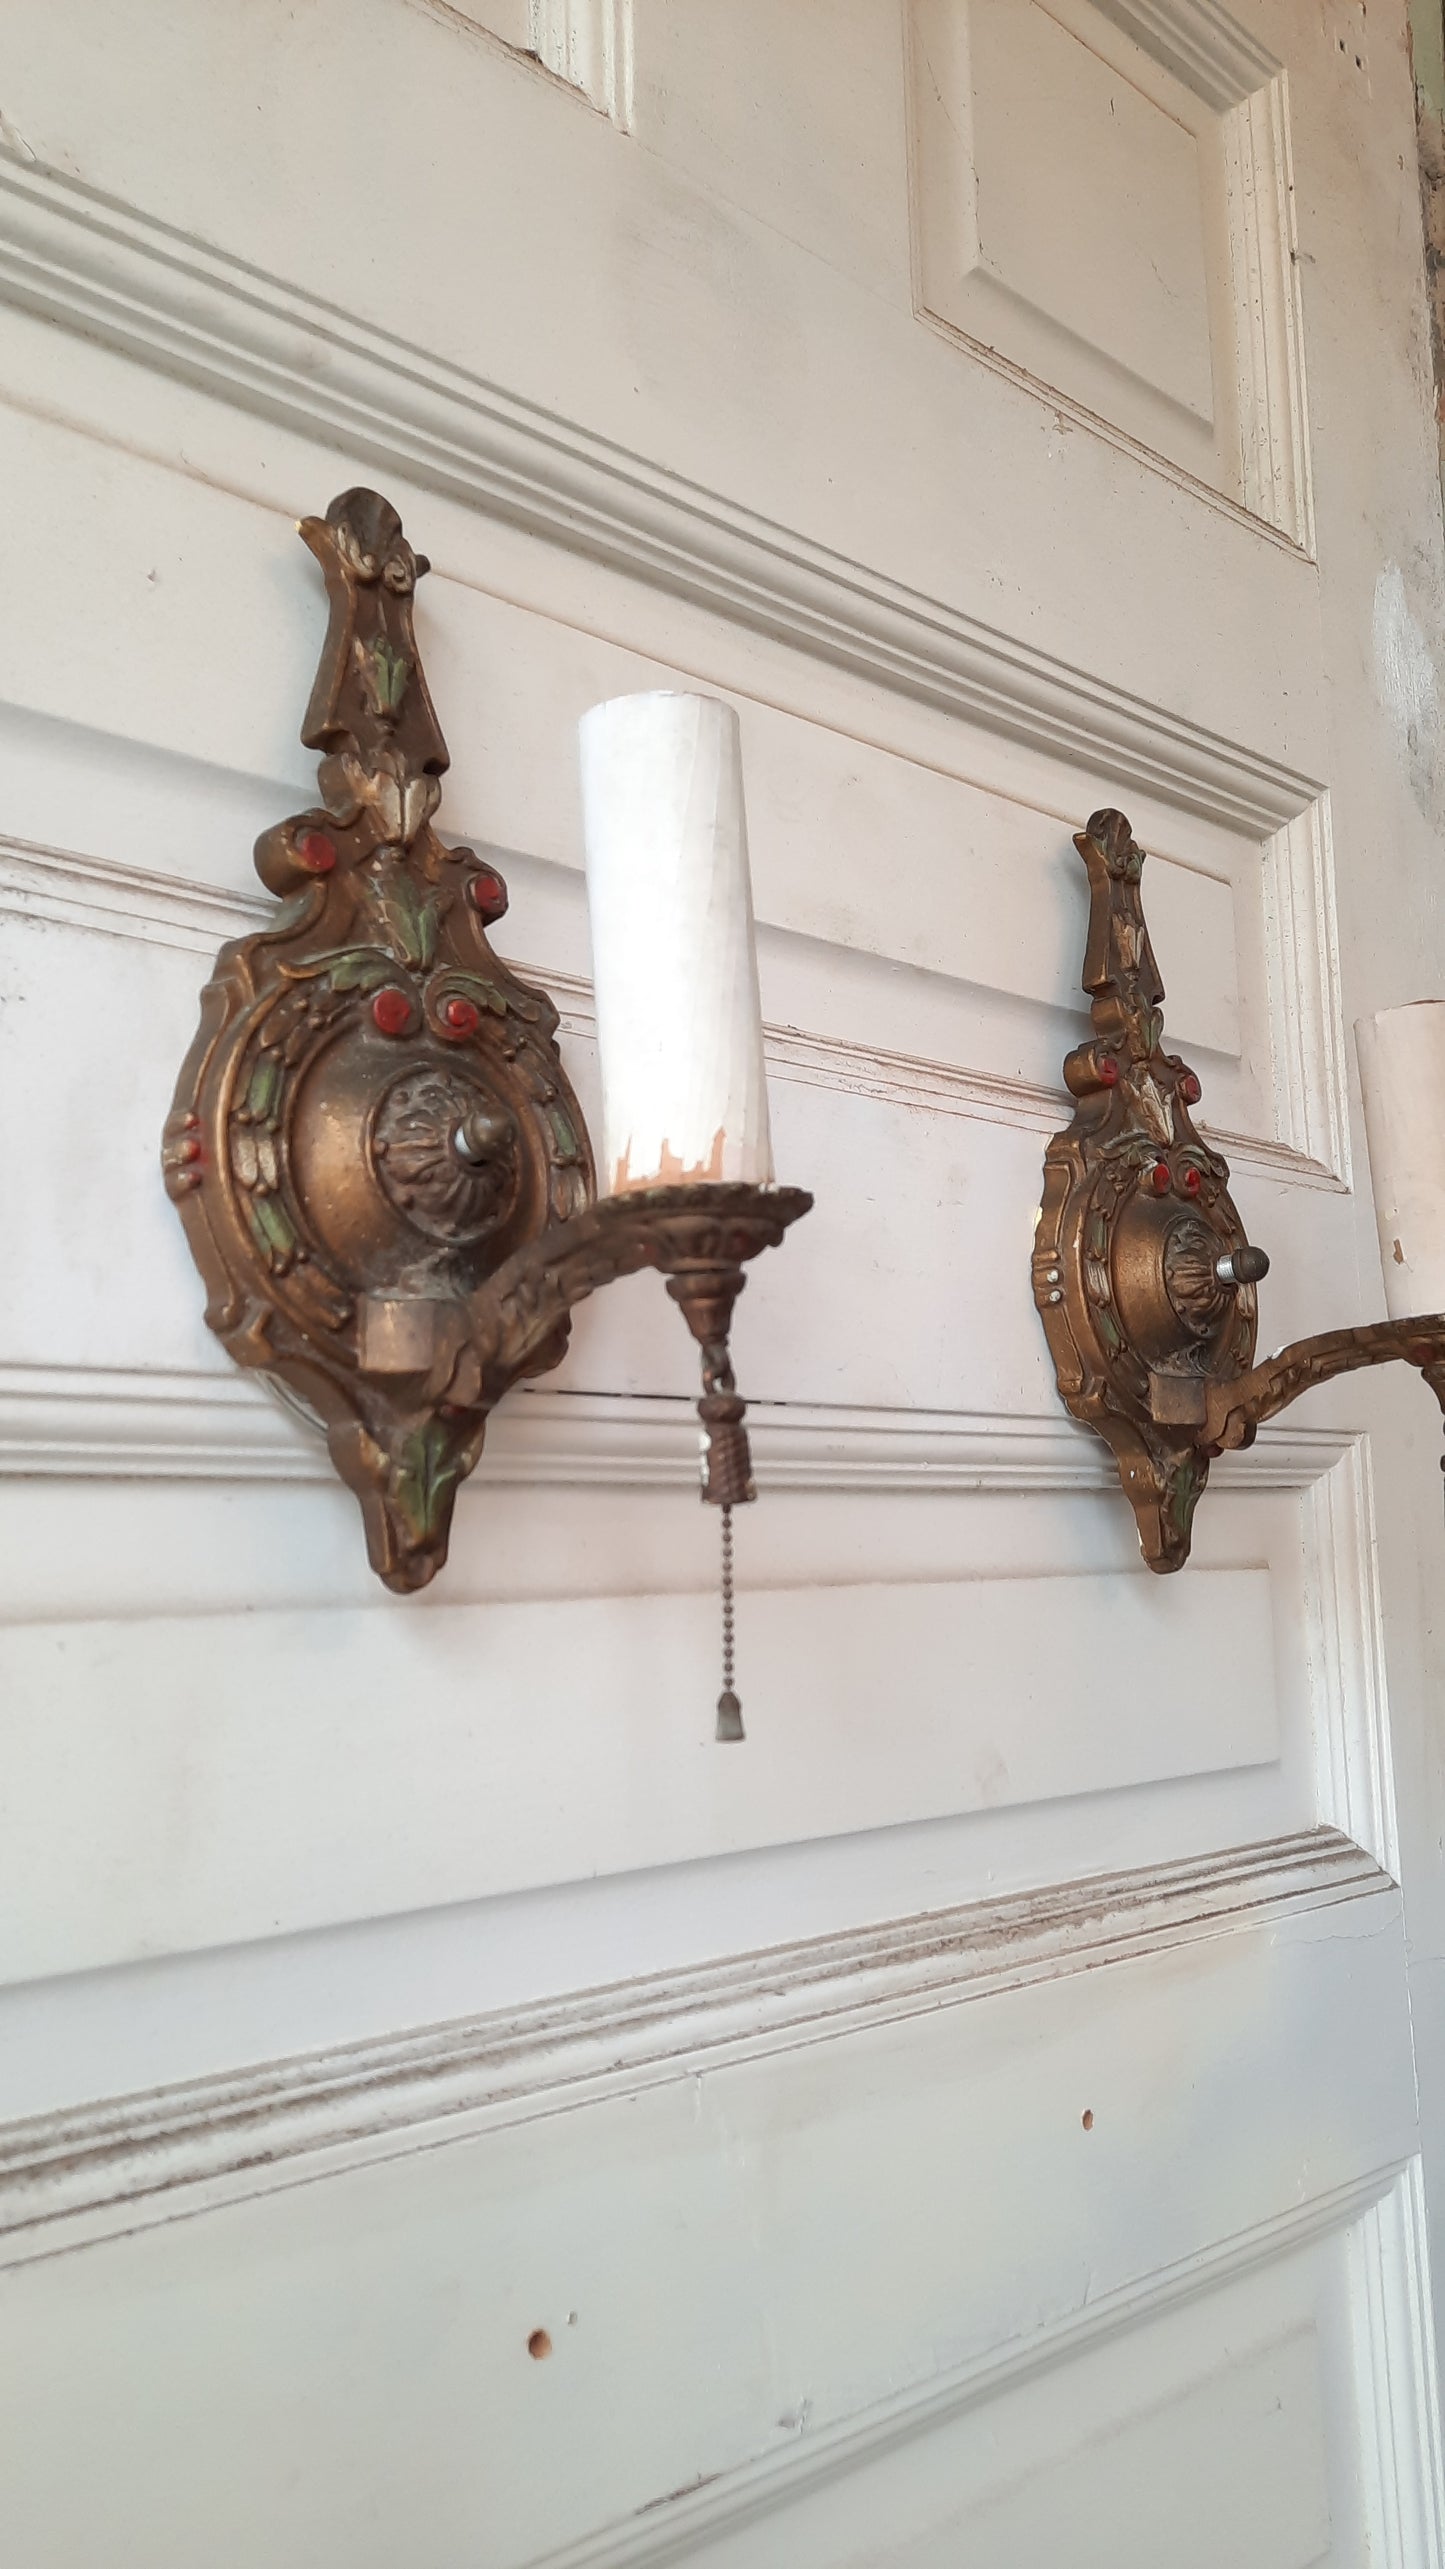 Pair of Polychrome Antique Wall Sconces, Antique Brass or Bronze Candle Wall Lights